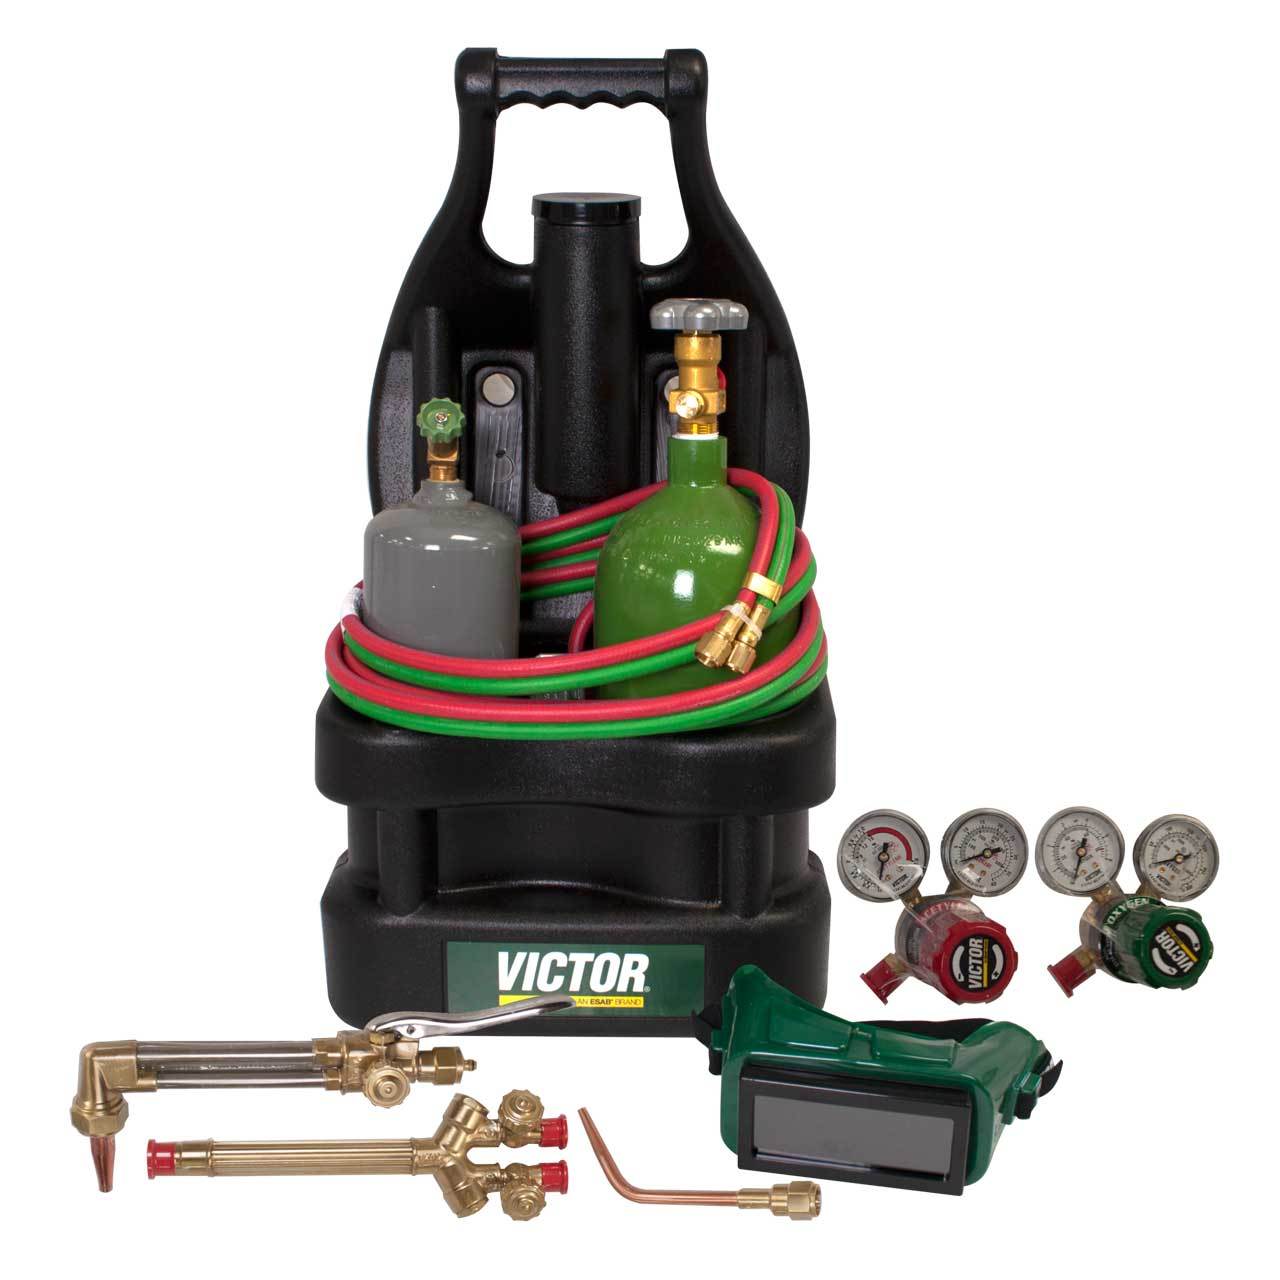 Victor G150-100-CPT Portable Tote Outfit With Tanks - 0384-0944